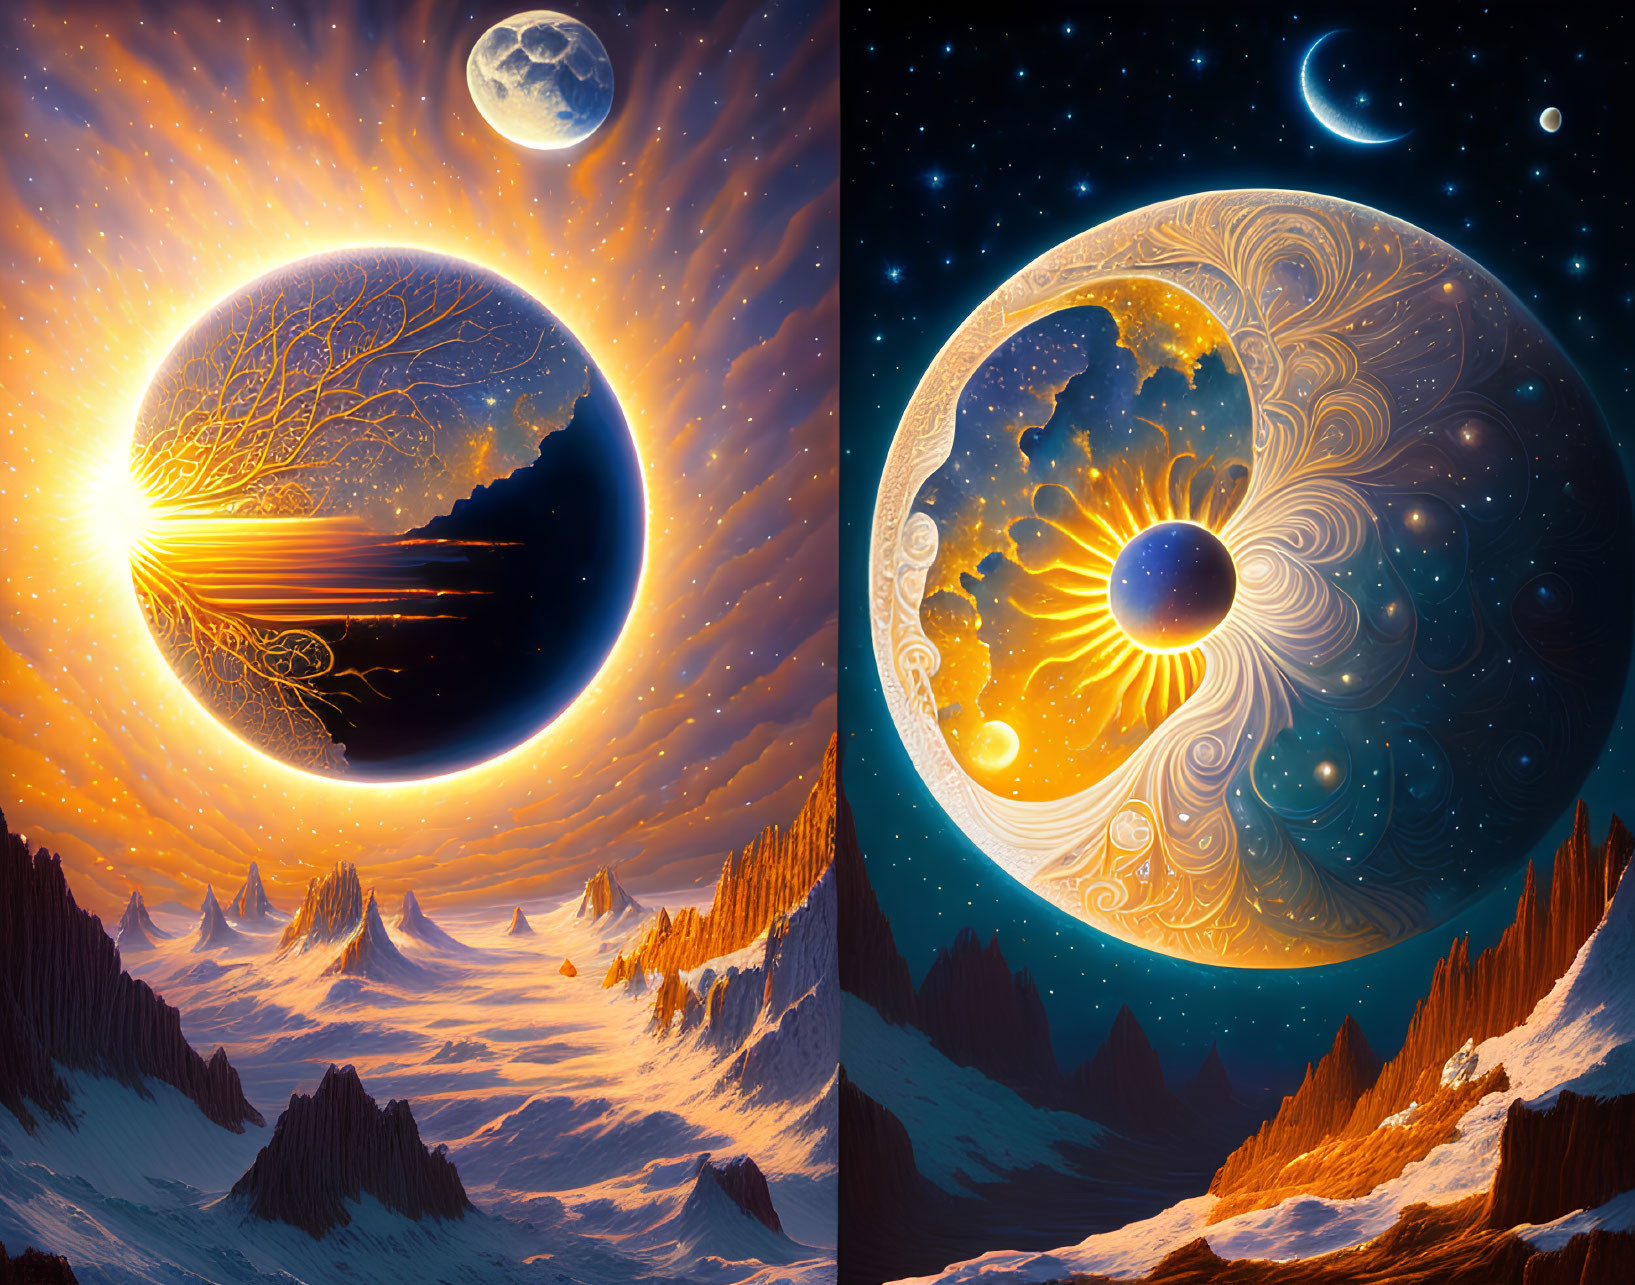 Circular cosmic entities diptych: day & night landscapes, vibrant colors